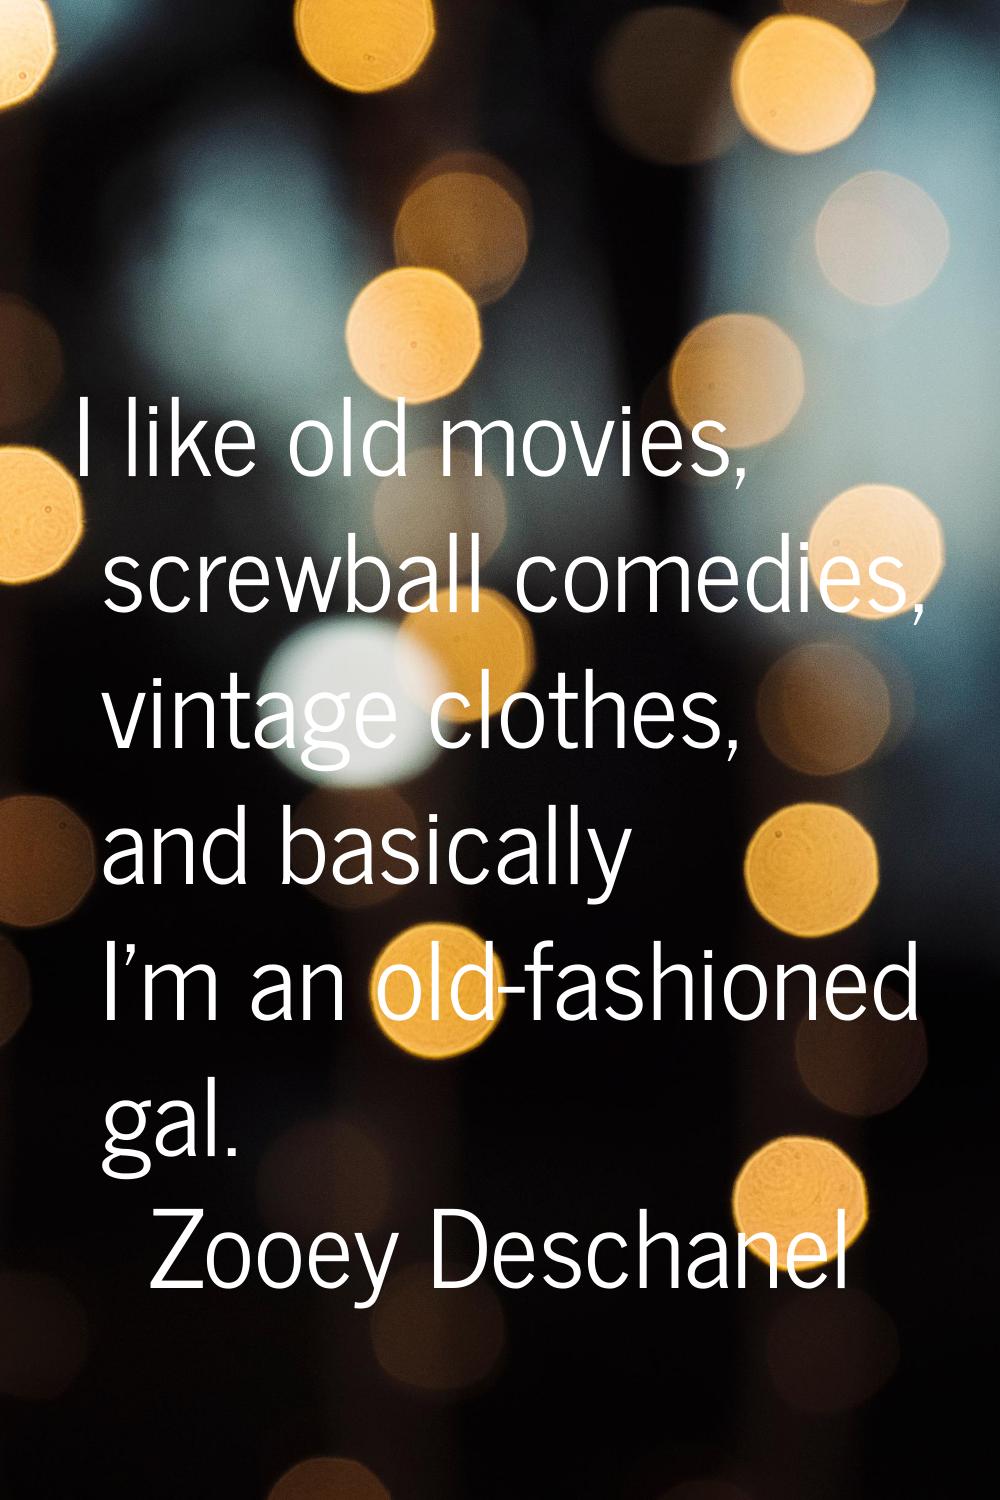 I like old movies, screwball comedies, vintage clothes, and basically I'm an old-fashioned gal.